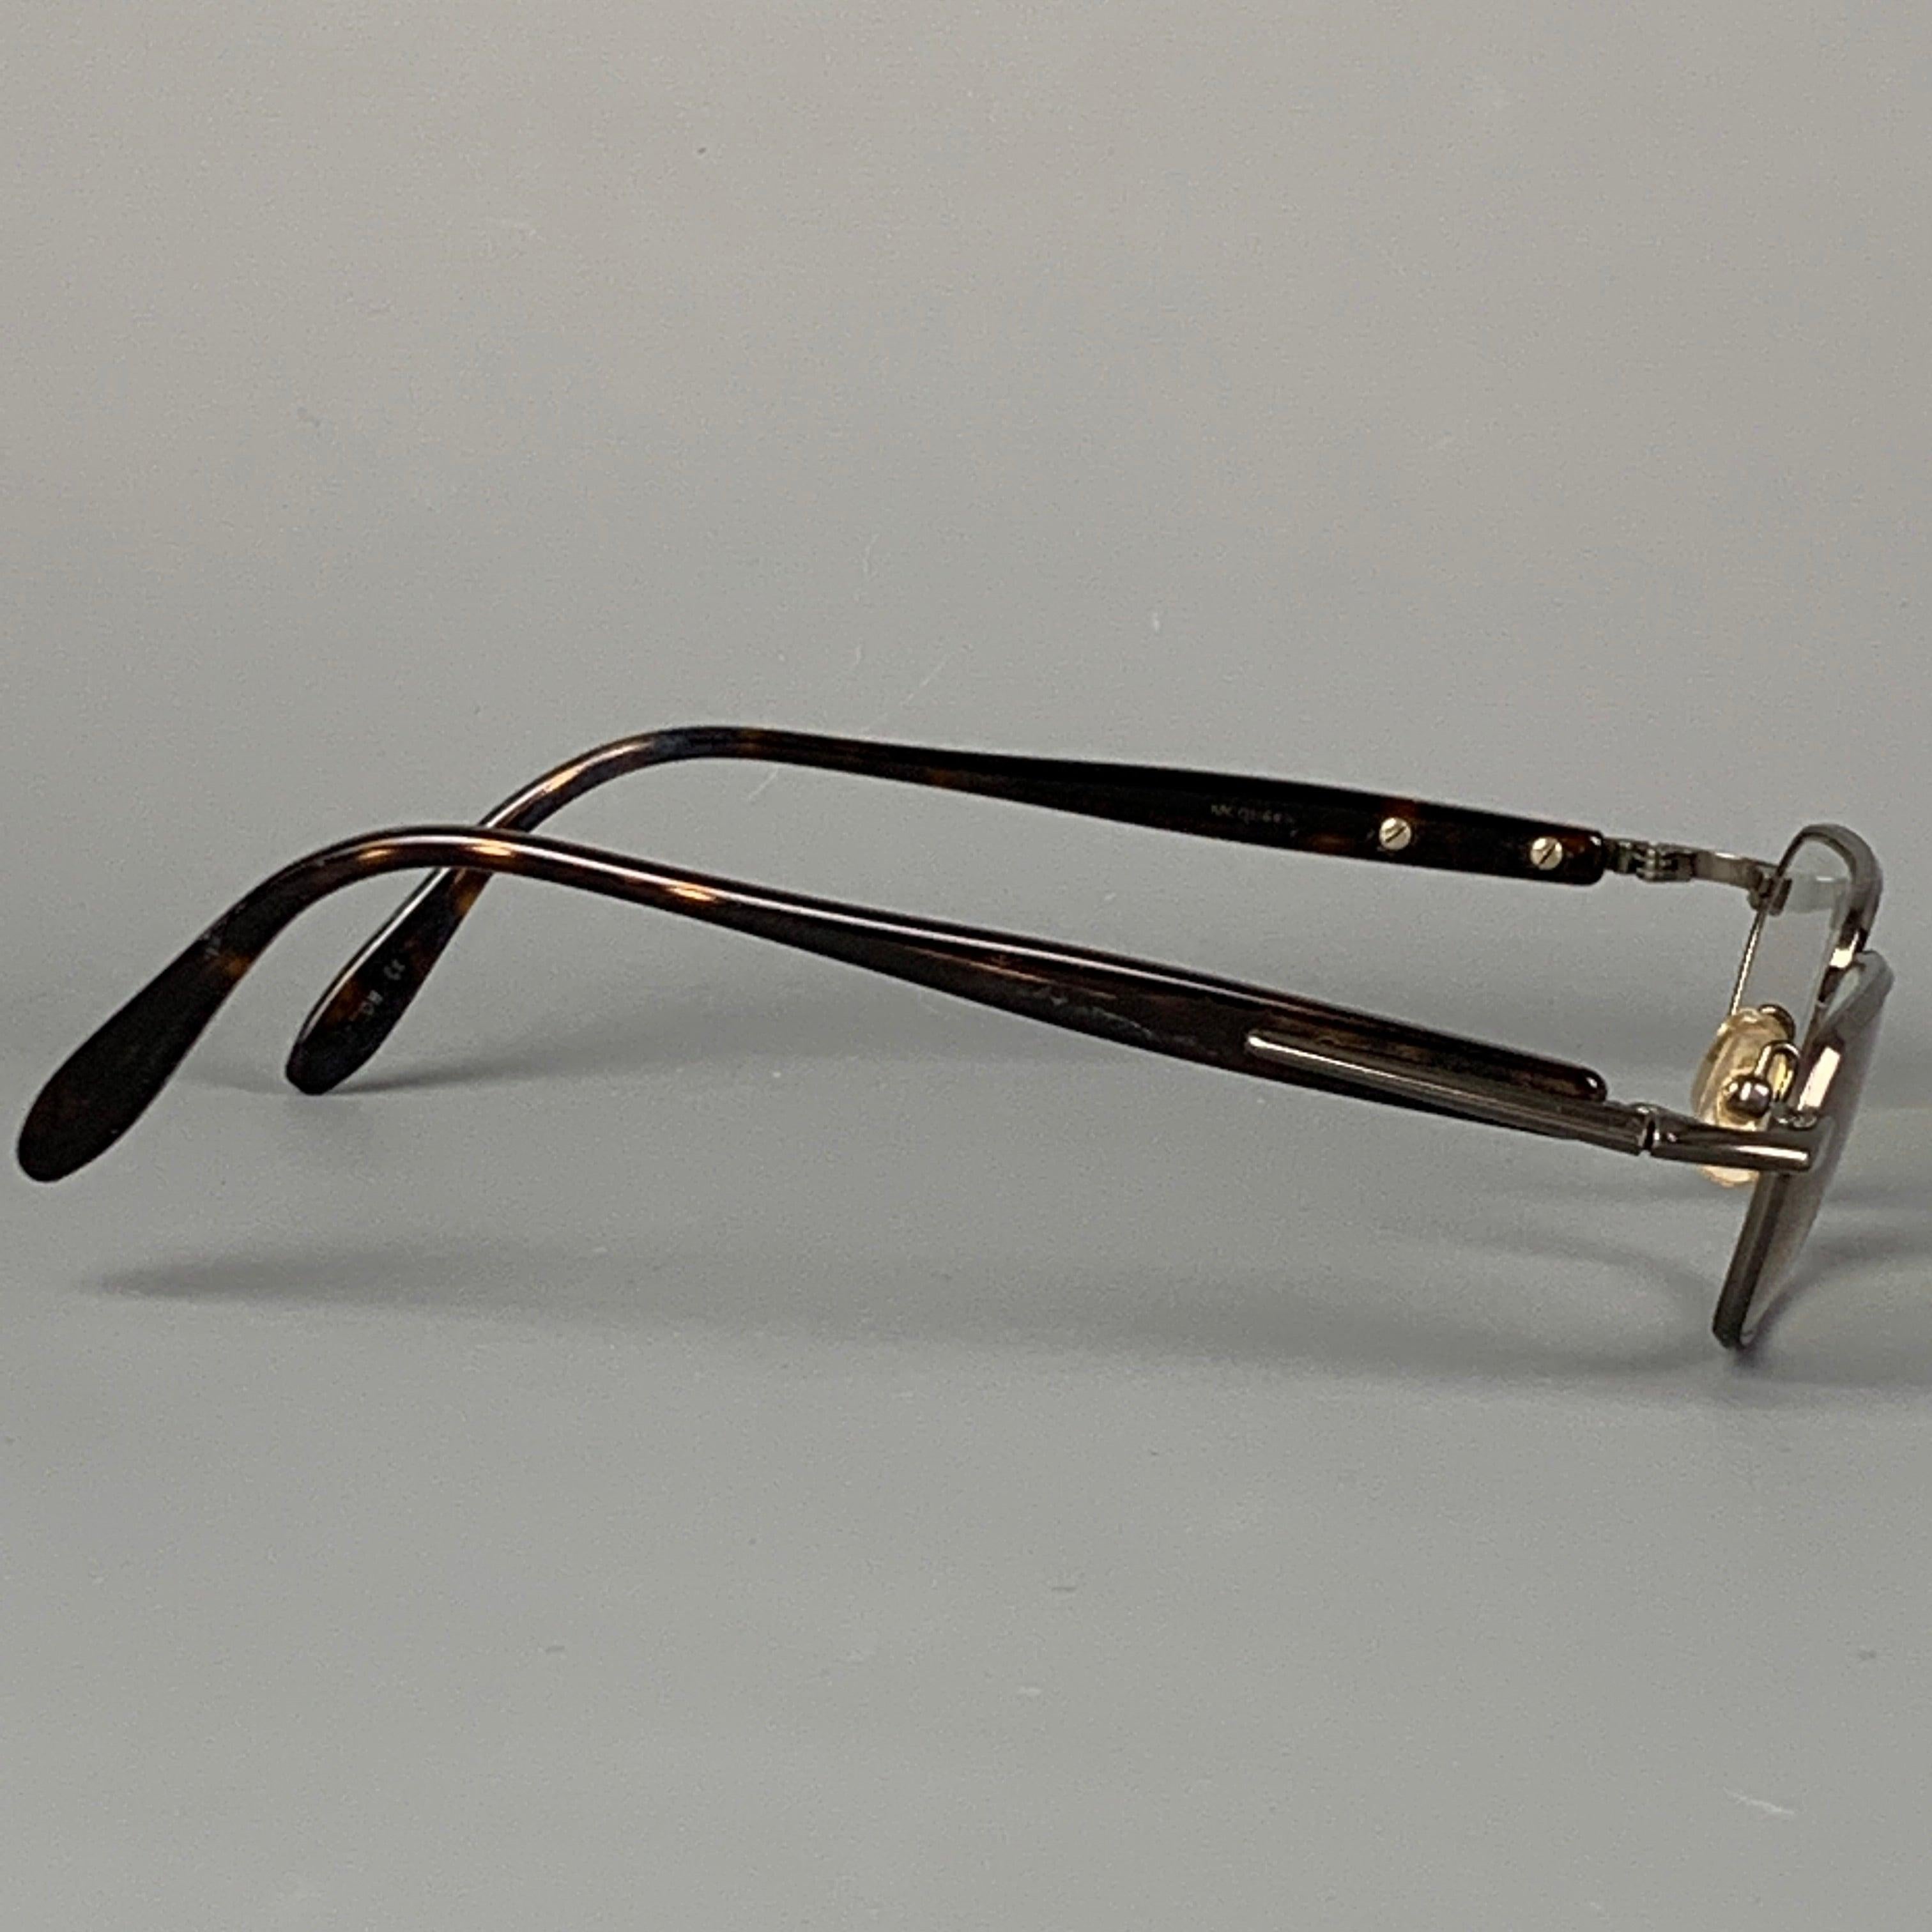 KIESELSTEIN-CORD eyewear comes in a tortoise shell gunmetal with prescription lenses. Made in Japan. Good
Pre-Owned Condition. 

Measurements: 
  Length: 14 cm. Height: 3 inches 
  
  
 
Reference: 114878
Category: Sunglasses & Eyewear
More Details
